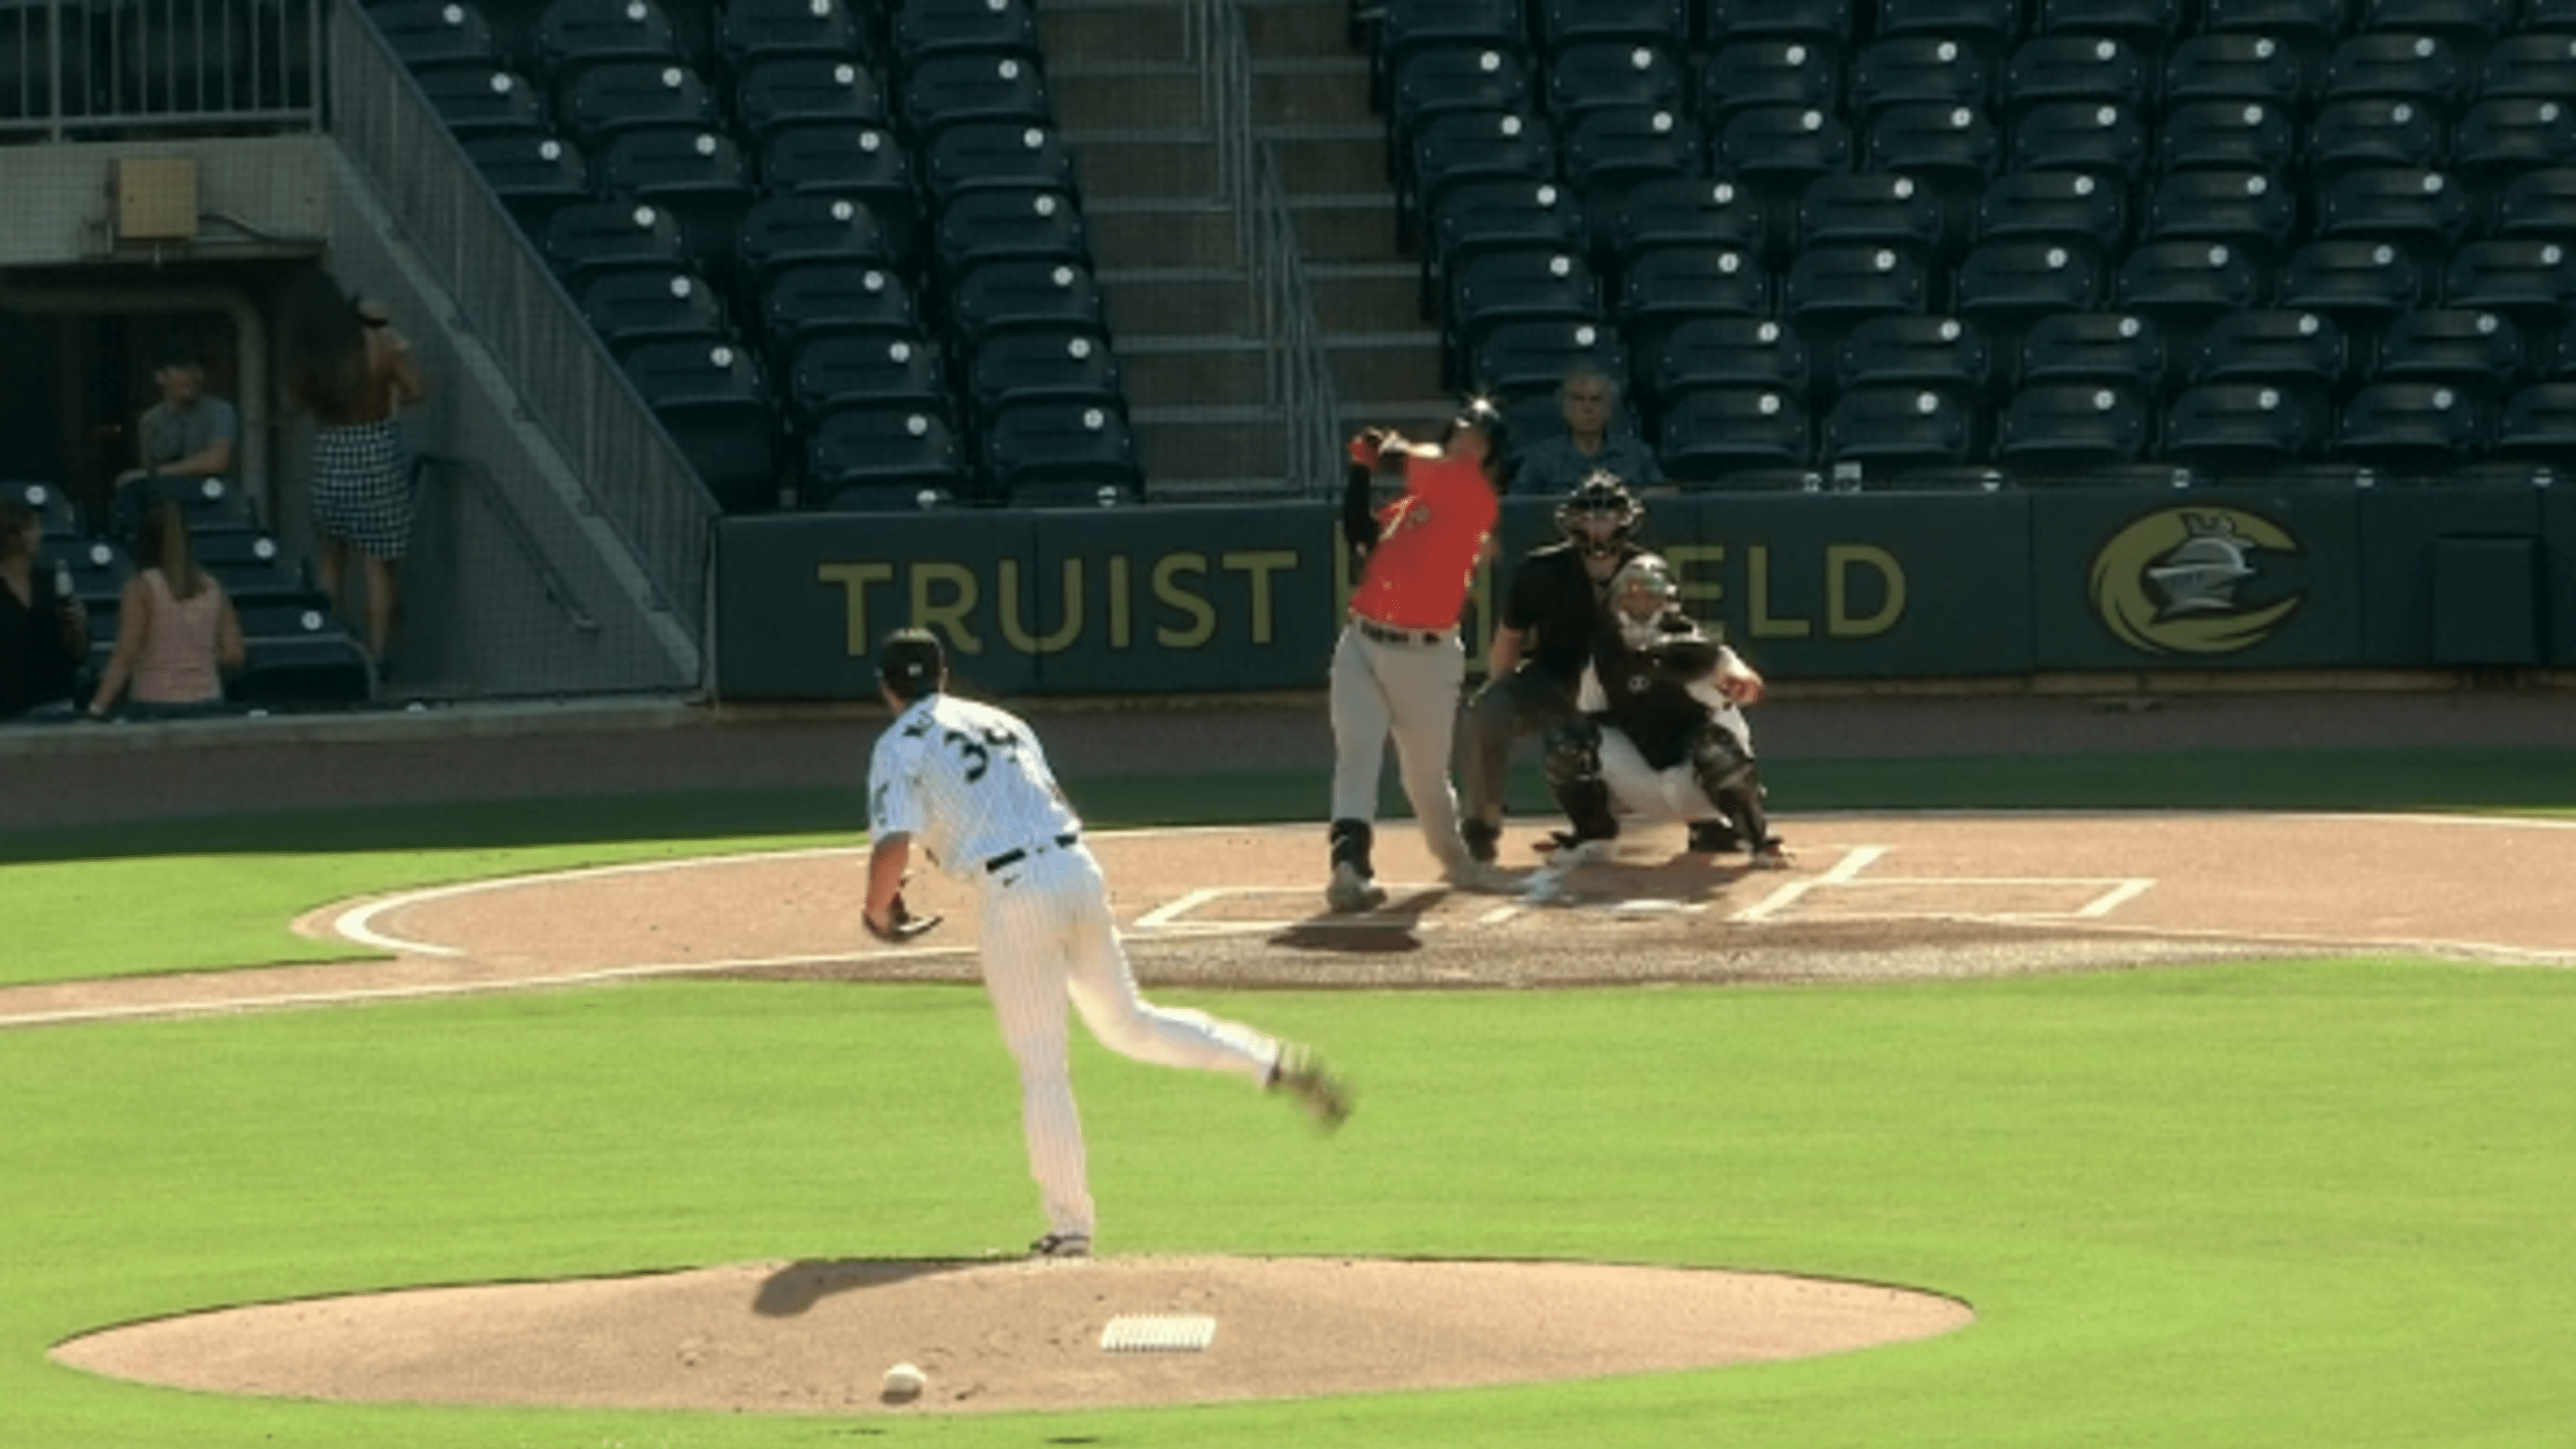 Top prospect Adley Rutschman's stay with the Norfolk Tides was